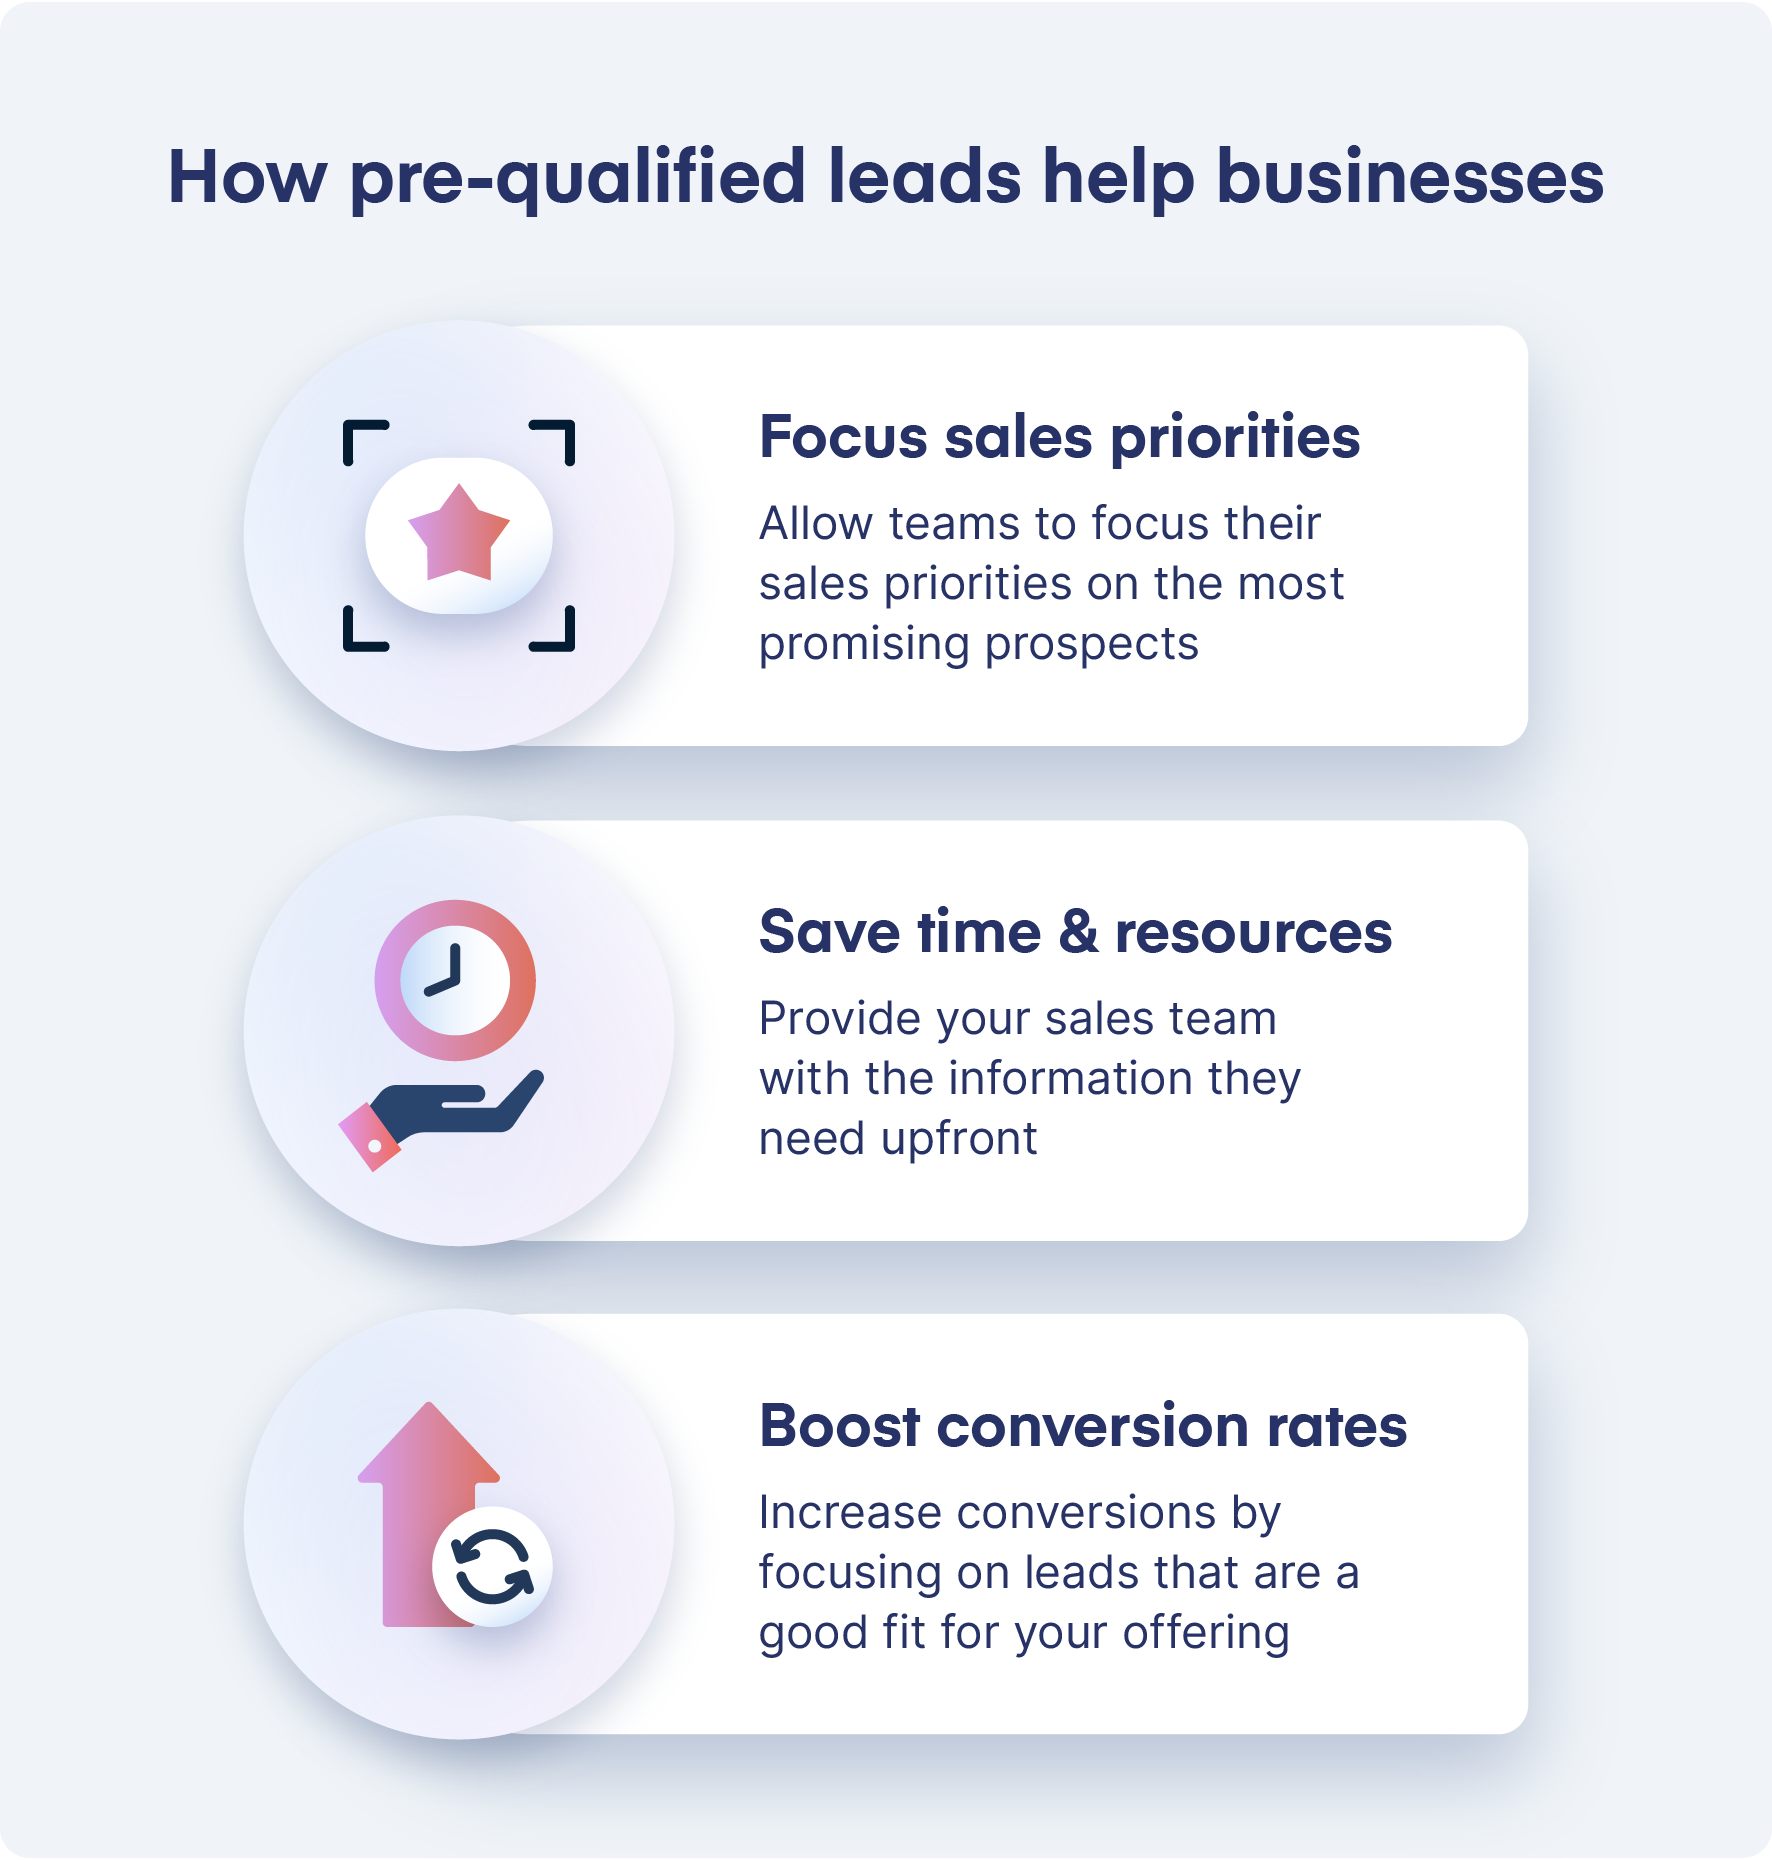 how pre-qualified leads help businesses.